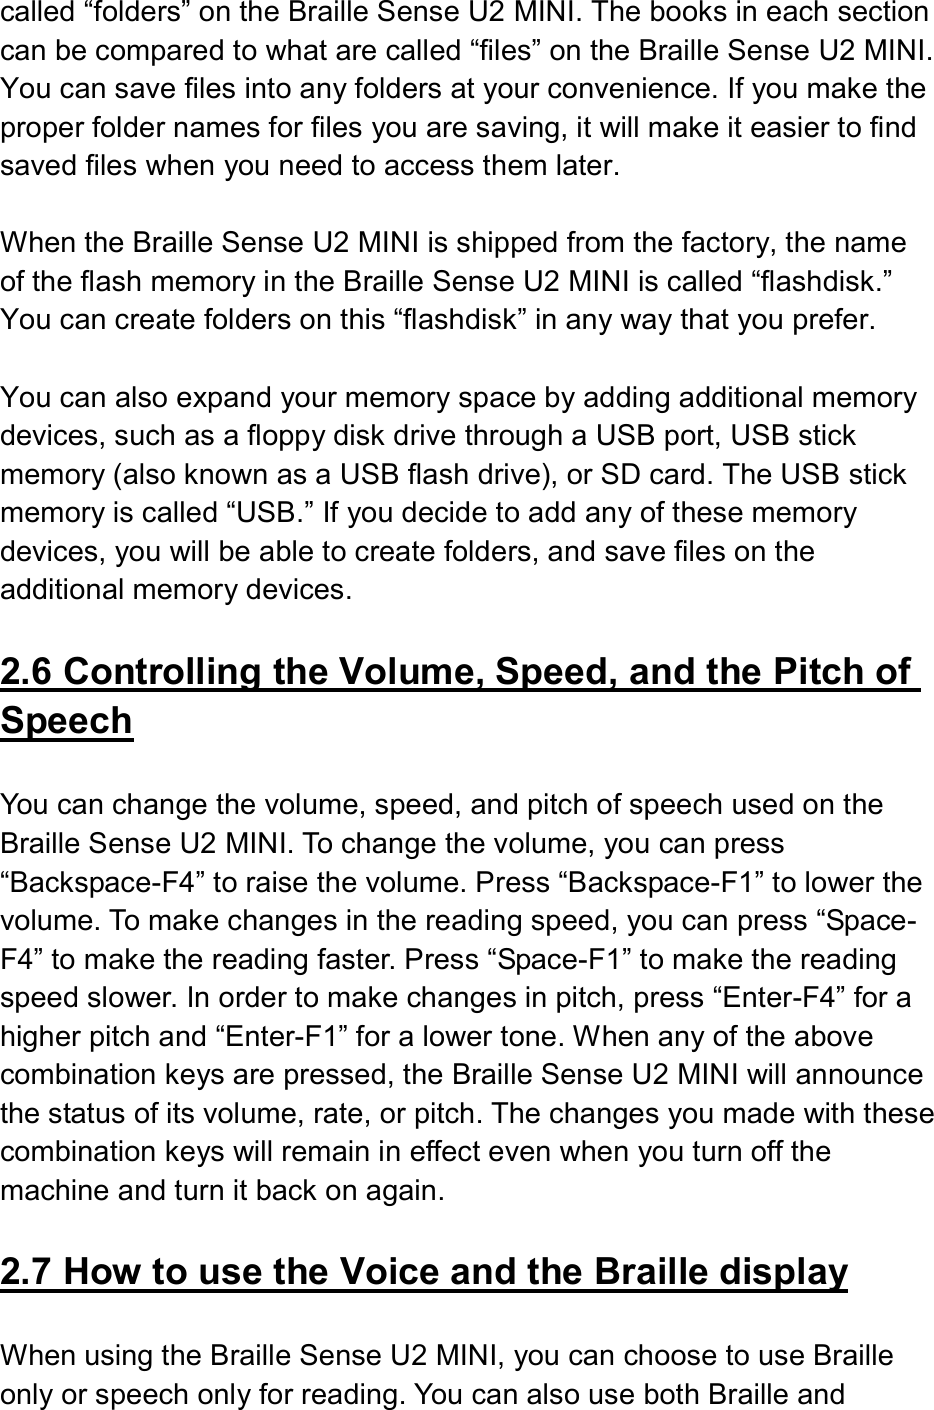  called “folders” on the Braille Sense U2 MINI. The books in each section can be compared to what are called “files” on the Braille Sense U2 MINI. You can save files into any folders at your convenience. If you make the proper folder names for files you are saving, it will make it easier to find saved files when you need to access them later.  When the Braille Sense U2 MINI is shipped from the factory, the name of the flash memory in the Braille Sense U2 MINI is called “flashdisk.” You can create folders on this “flashdisk” in any way that you prefer.  You can also expand your memory space by adding additional memory devices, such as a floppy disk drive through a USB port, USB stick memory (also known as a USB flash drive), or SD card. The USB stick memory is called “USB.” If you decide to add any of these memory devices, you will be able to create folders, and save files on the additional memory devices.  2.6 Controlling the Volume, Speed, and the Pitch of Speech  You can change the volume, speed, and pitch of speech used on the Braille Sense U2 MINI. To change the volume, you can press “Backspace-F4” to raise the volume. Press “Backspace-F1” to lower the volume. To make changes in the reading speed, you can press “Space-F4” to make the reading faster. Press “Space-F1” to make the reading speed slower. In order to make changes in pitch, press “Enter-F4” for a higher pitch and “Enter-F1” for a lower tone. When any of the above combination keys are pressed, the Braille Sense U2 MINI will announce the status of its volume, rate, or pitch. The changes you made with these combination keys will remain in effect even when you turn off the machine and turn it back on again.    2.7 How to use the Voice and the Braille display  When using the Braille Sense U2 MINI, you can choose to use Braille only or speech only for reading. You can also use both Braille and 